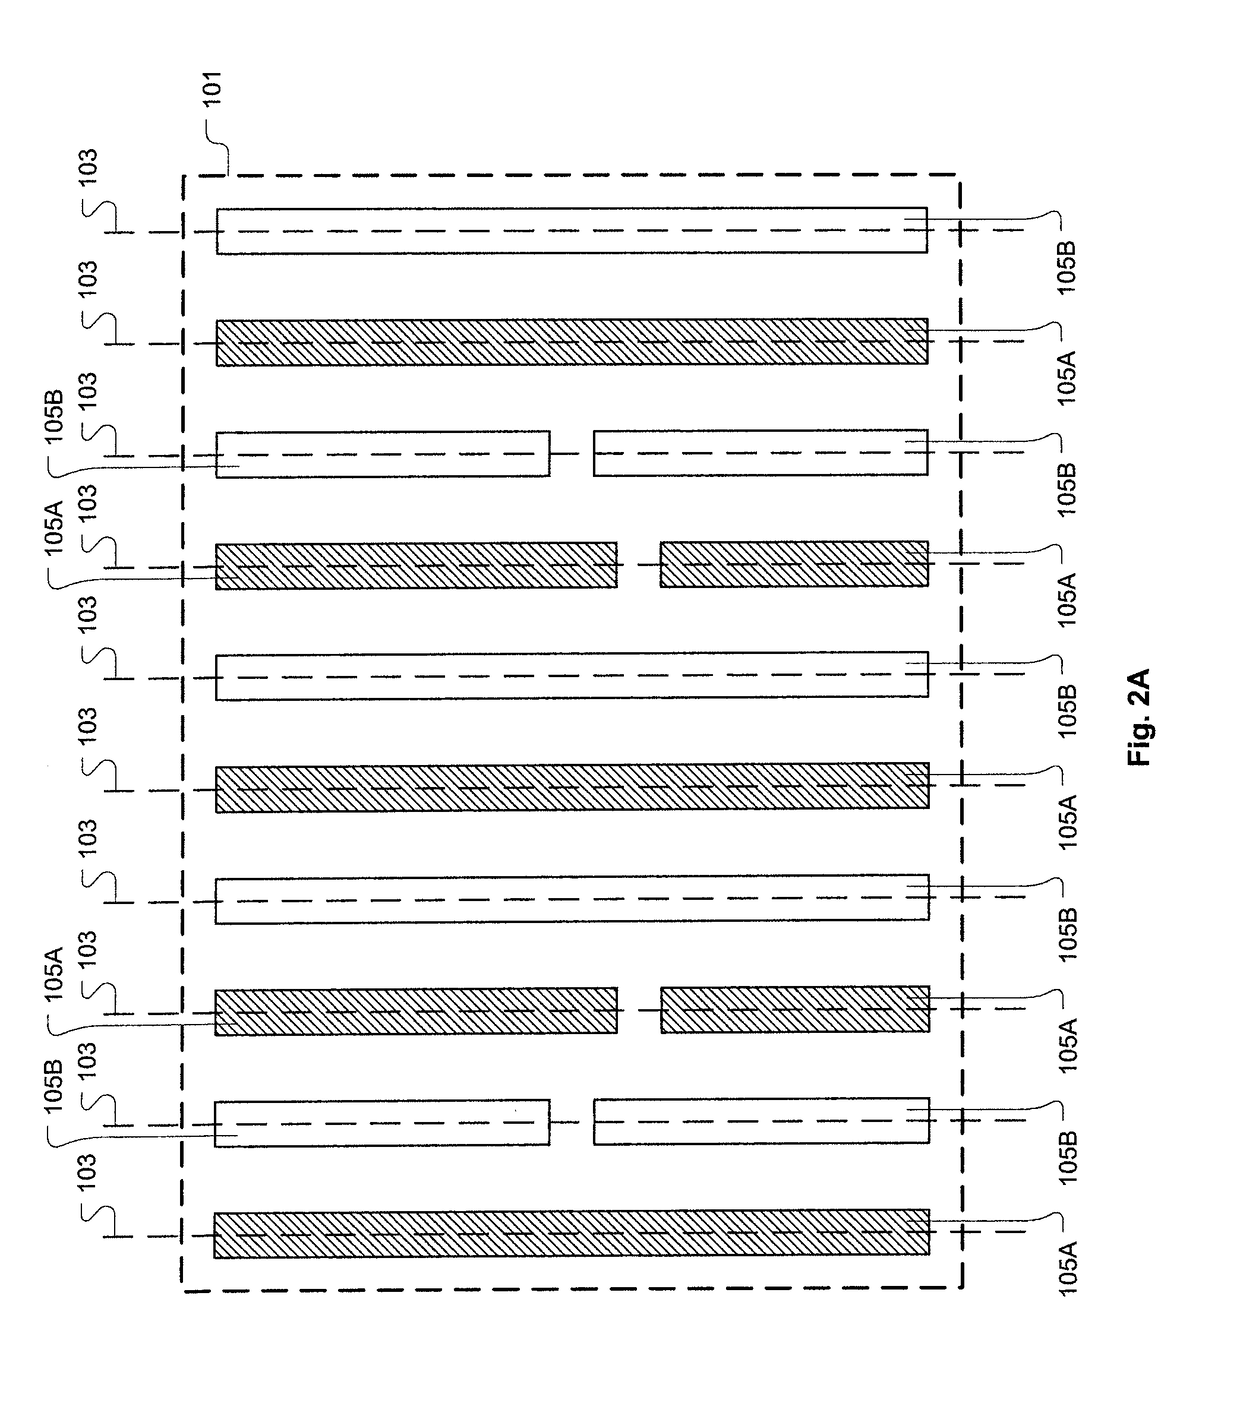 Integrated circuit cell library for multiple patterning